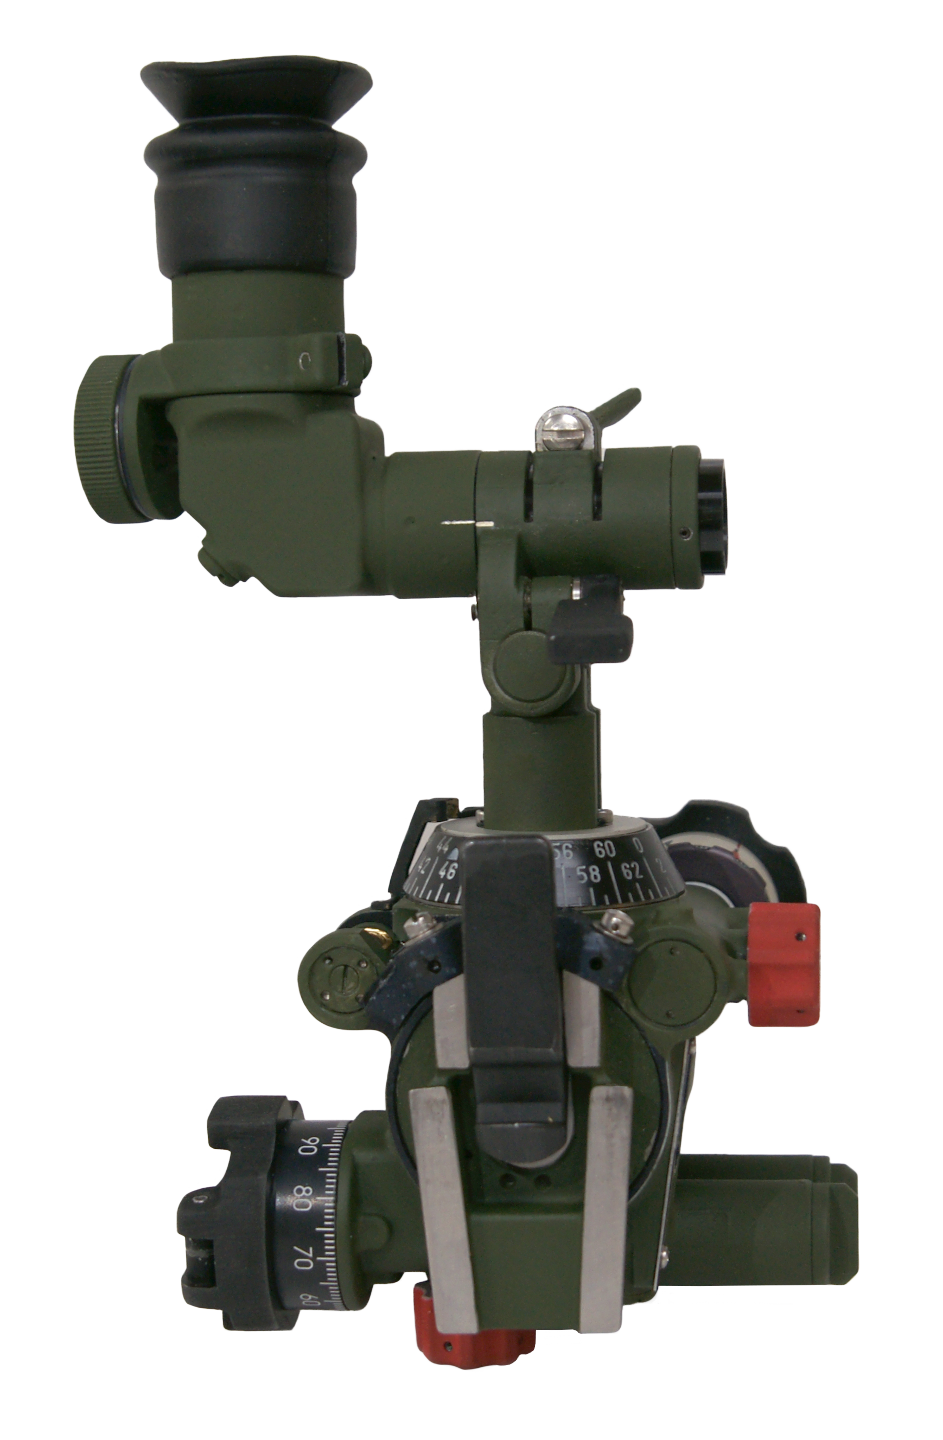 Side view of the M67A2 Sight Unit